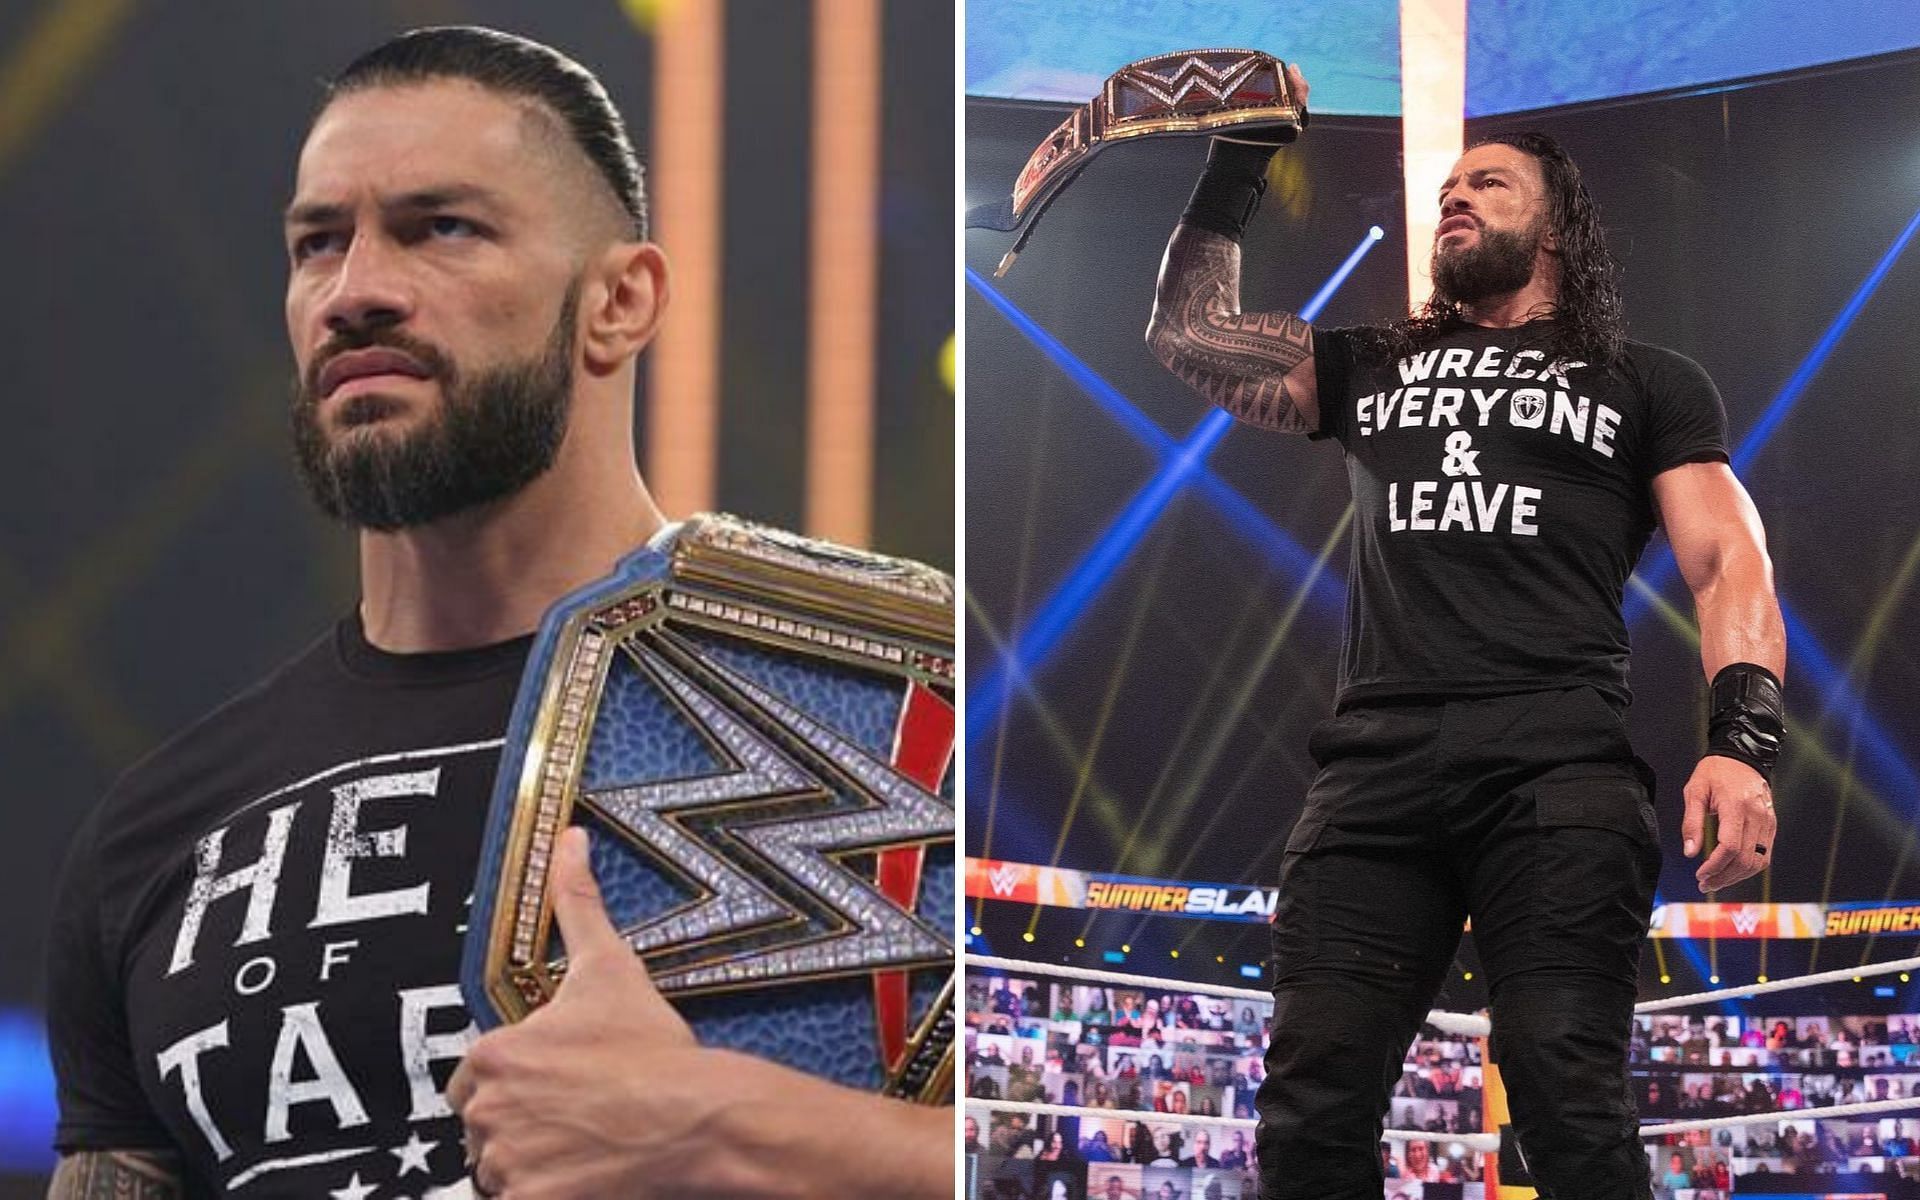 Roman Reigns continues to be the biggest star in professional wrestling